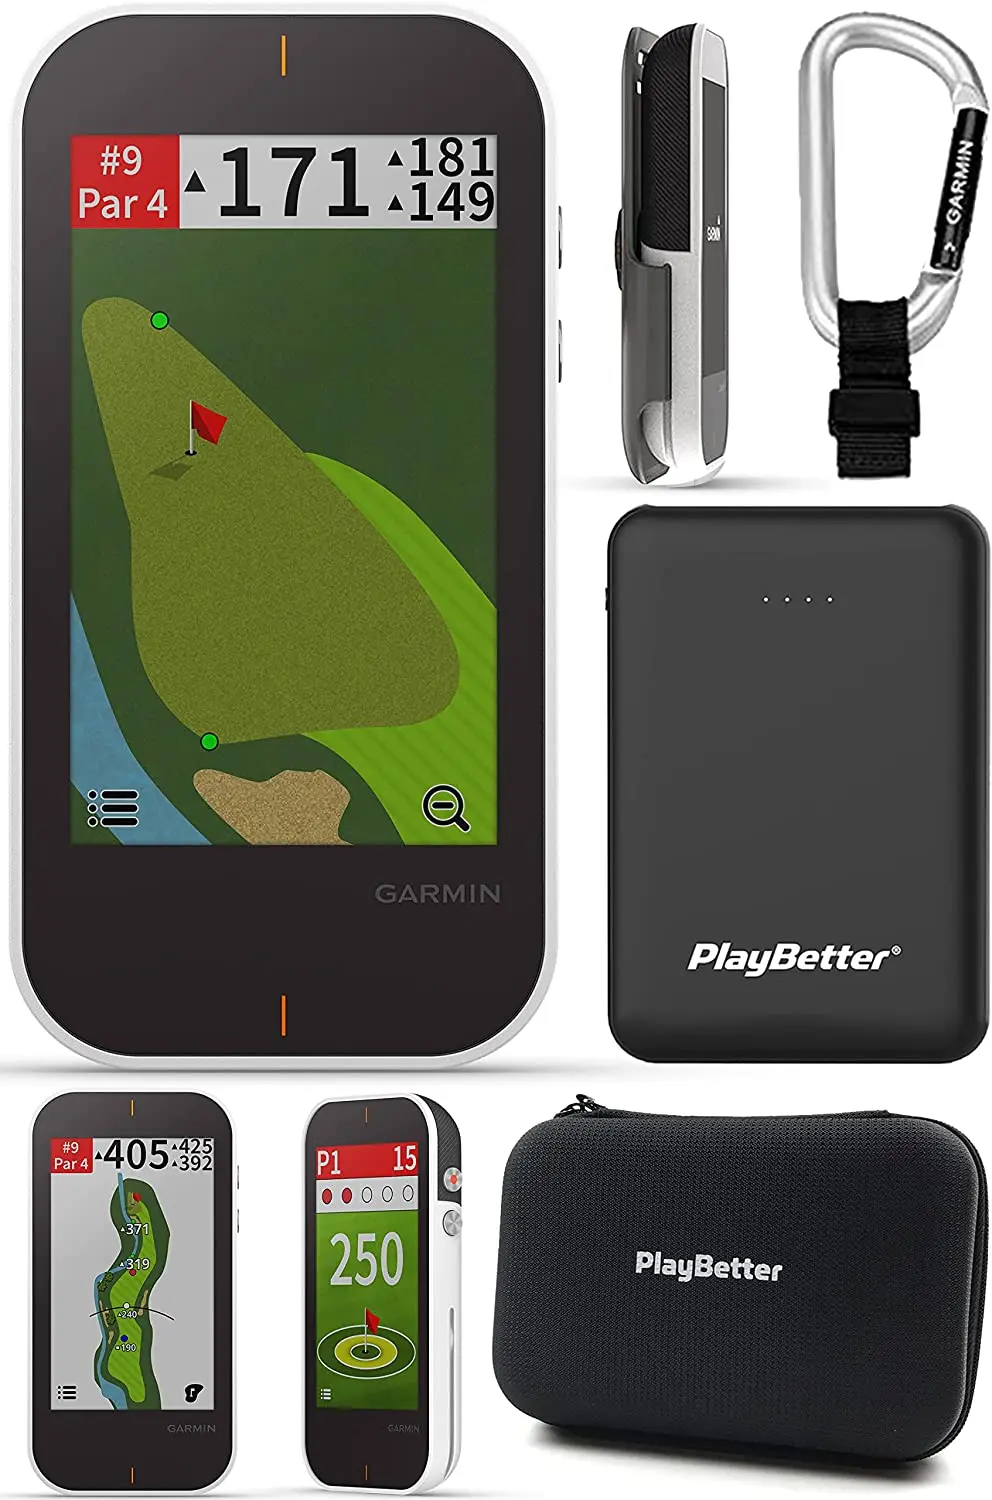 

Garmin Approach G80 Handheld Golf GPS + Launch Monitor Radar Bundle | PlayBetter Portable Charger, Protective Case, Cart/Trolley